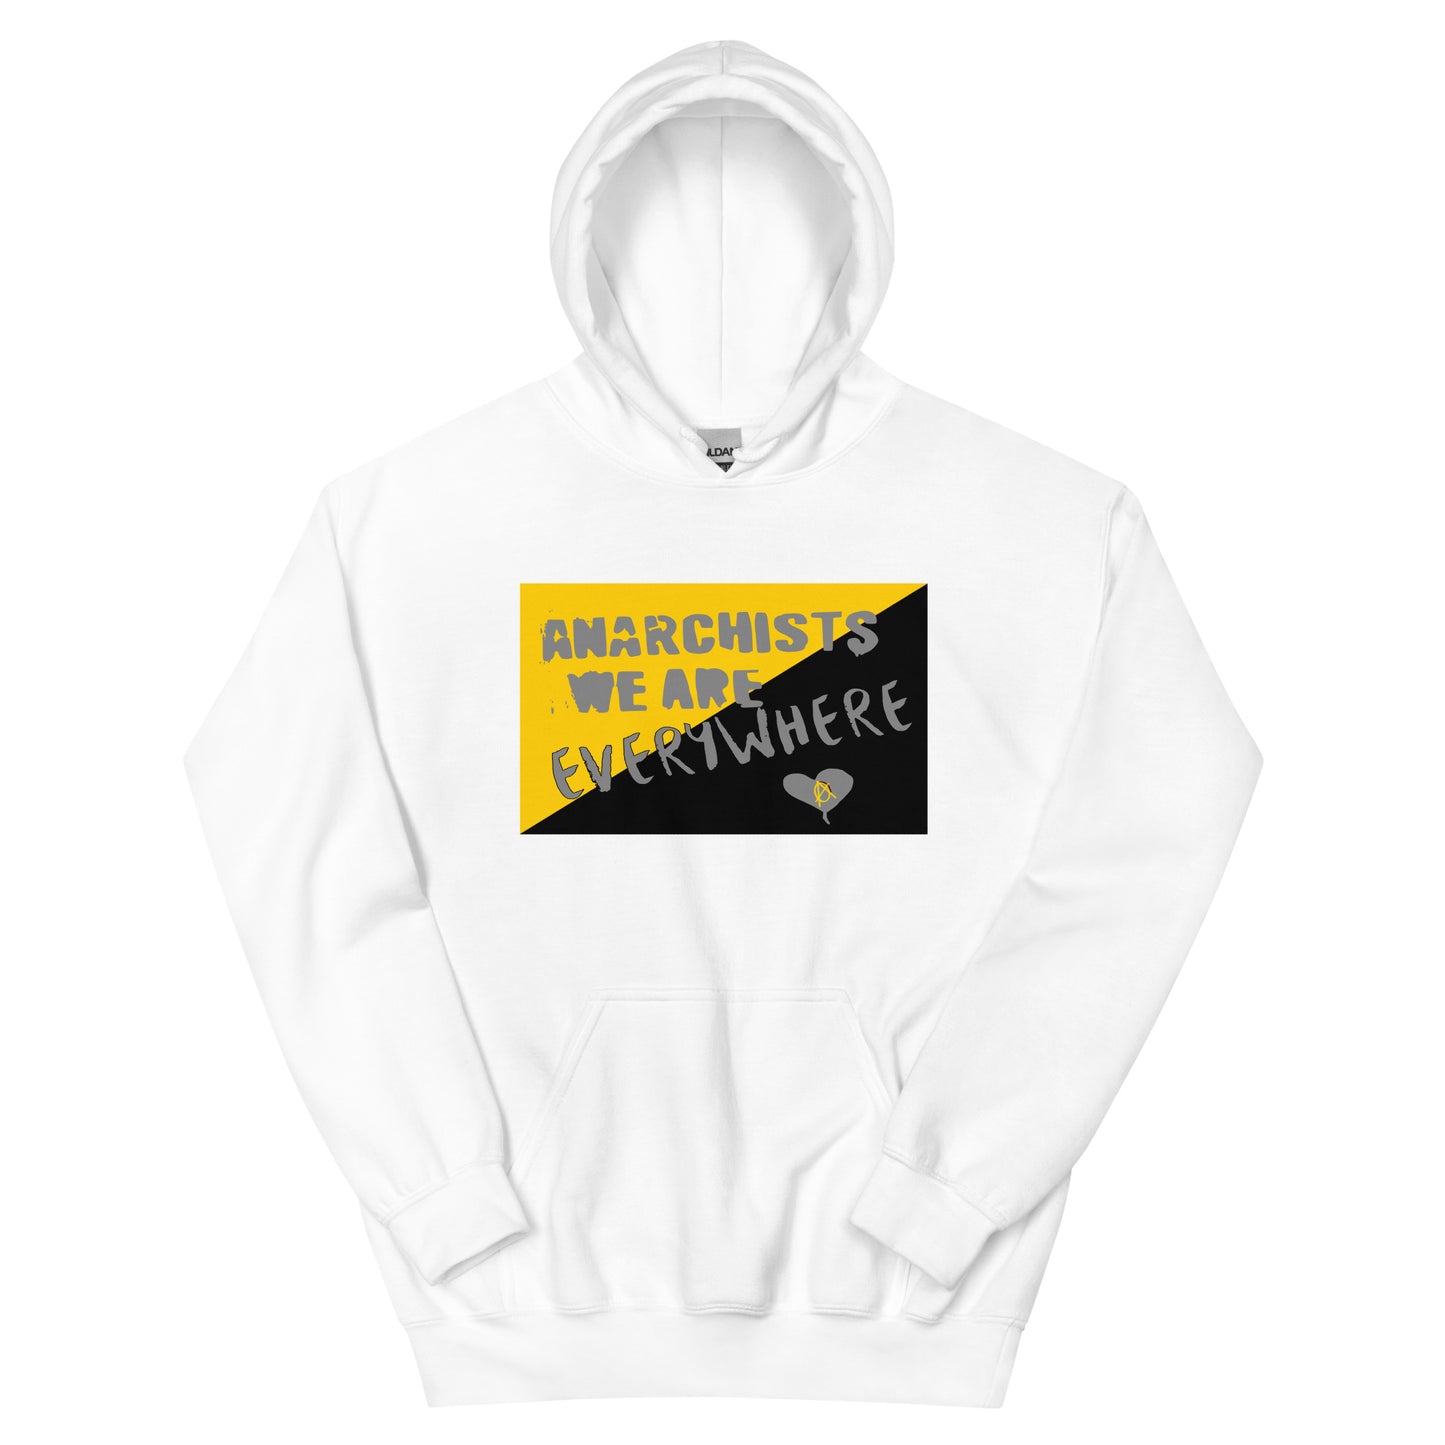 Anarchy Wear "We Are Every Where" Unisex Hoodie